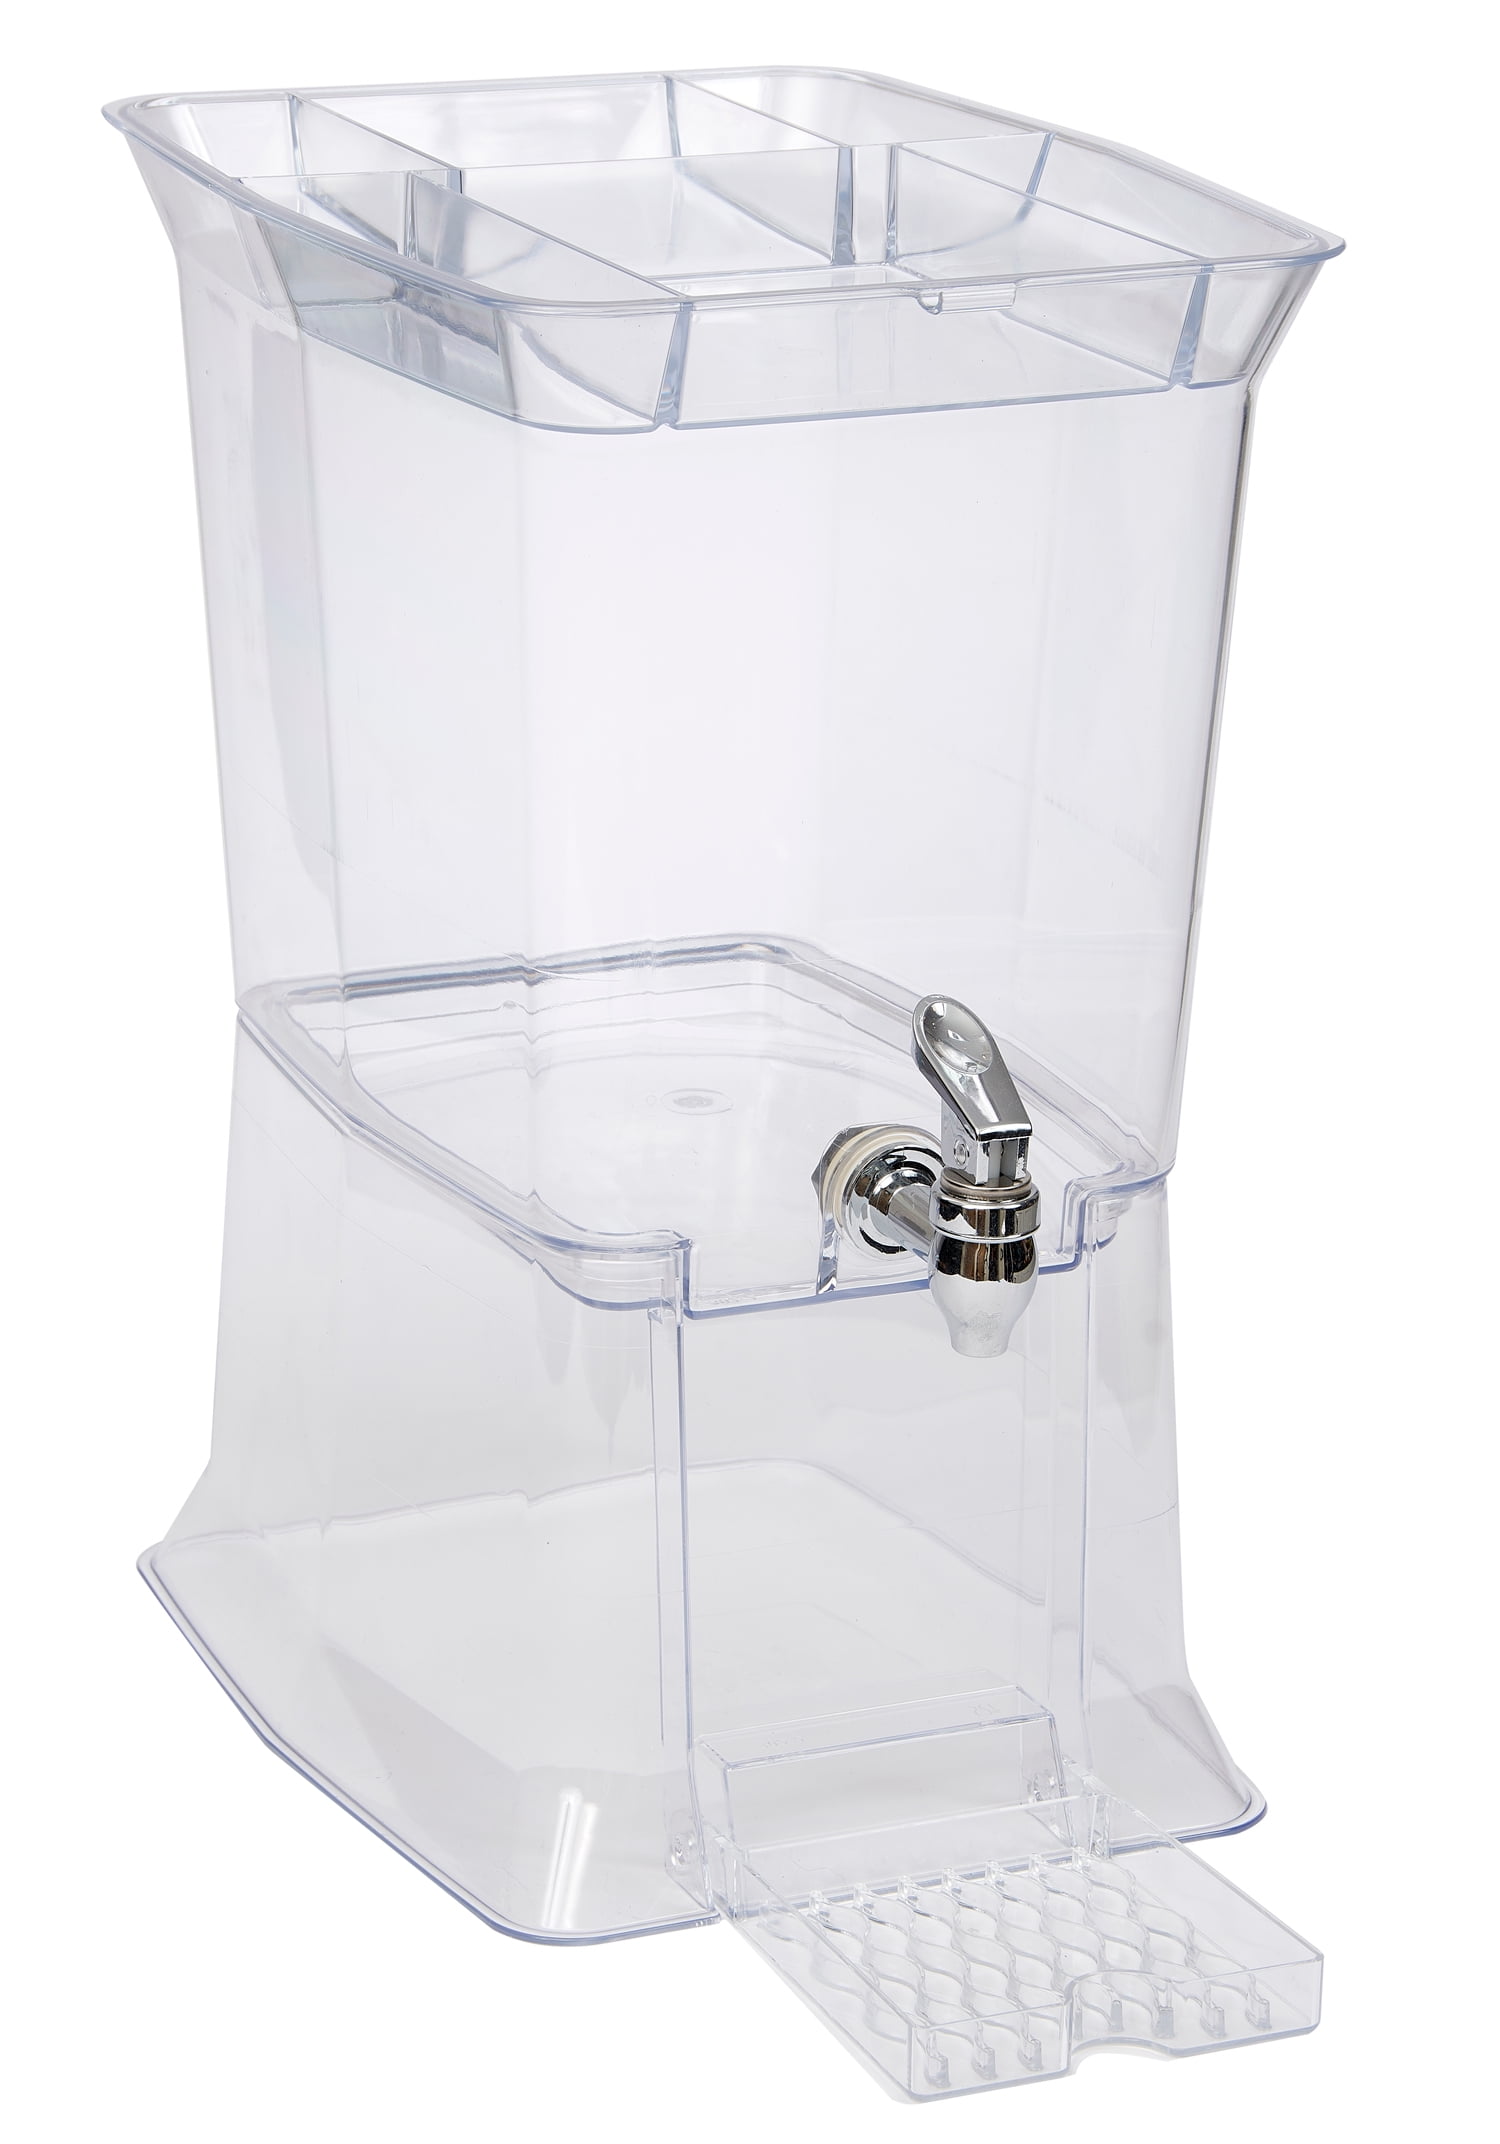 Buddeez 3.5 Gallon Beverage Dispenser - Clear Drink Dispenser, 3.5 Gallon  Plastic Beverage Dispenser comes with Stand, Spigot, Ice Cone, Large Punch